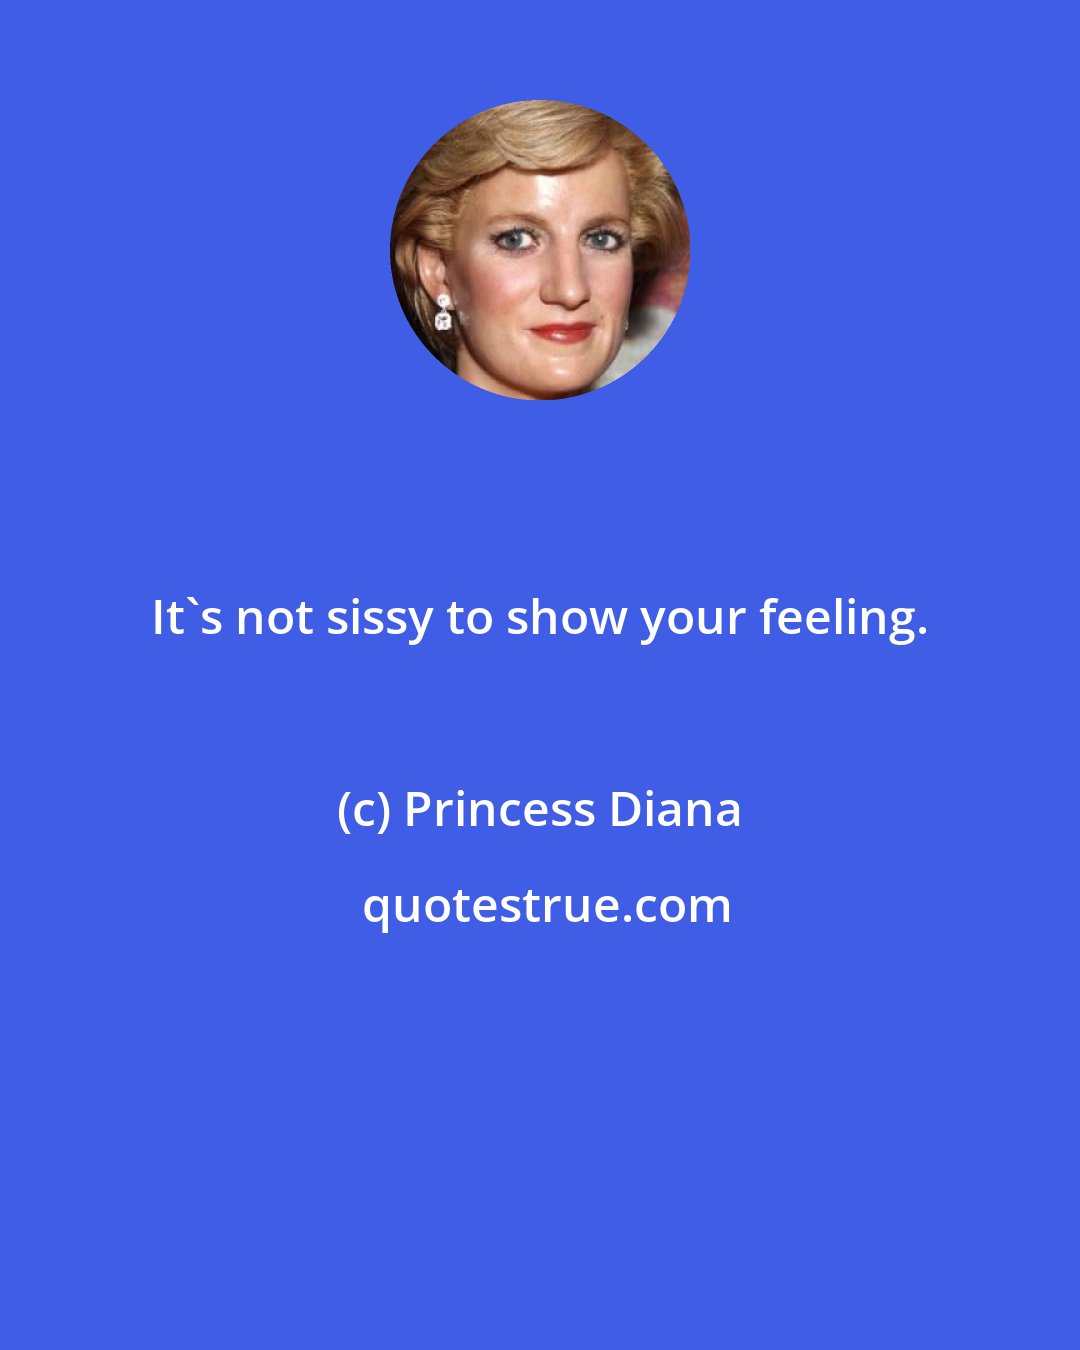 Princess Diana: It's not sissy to show your feeling.